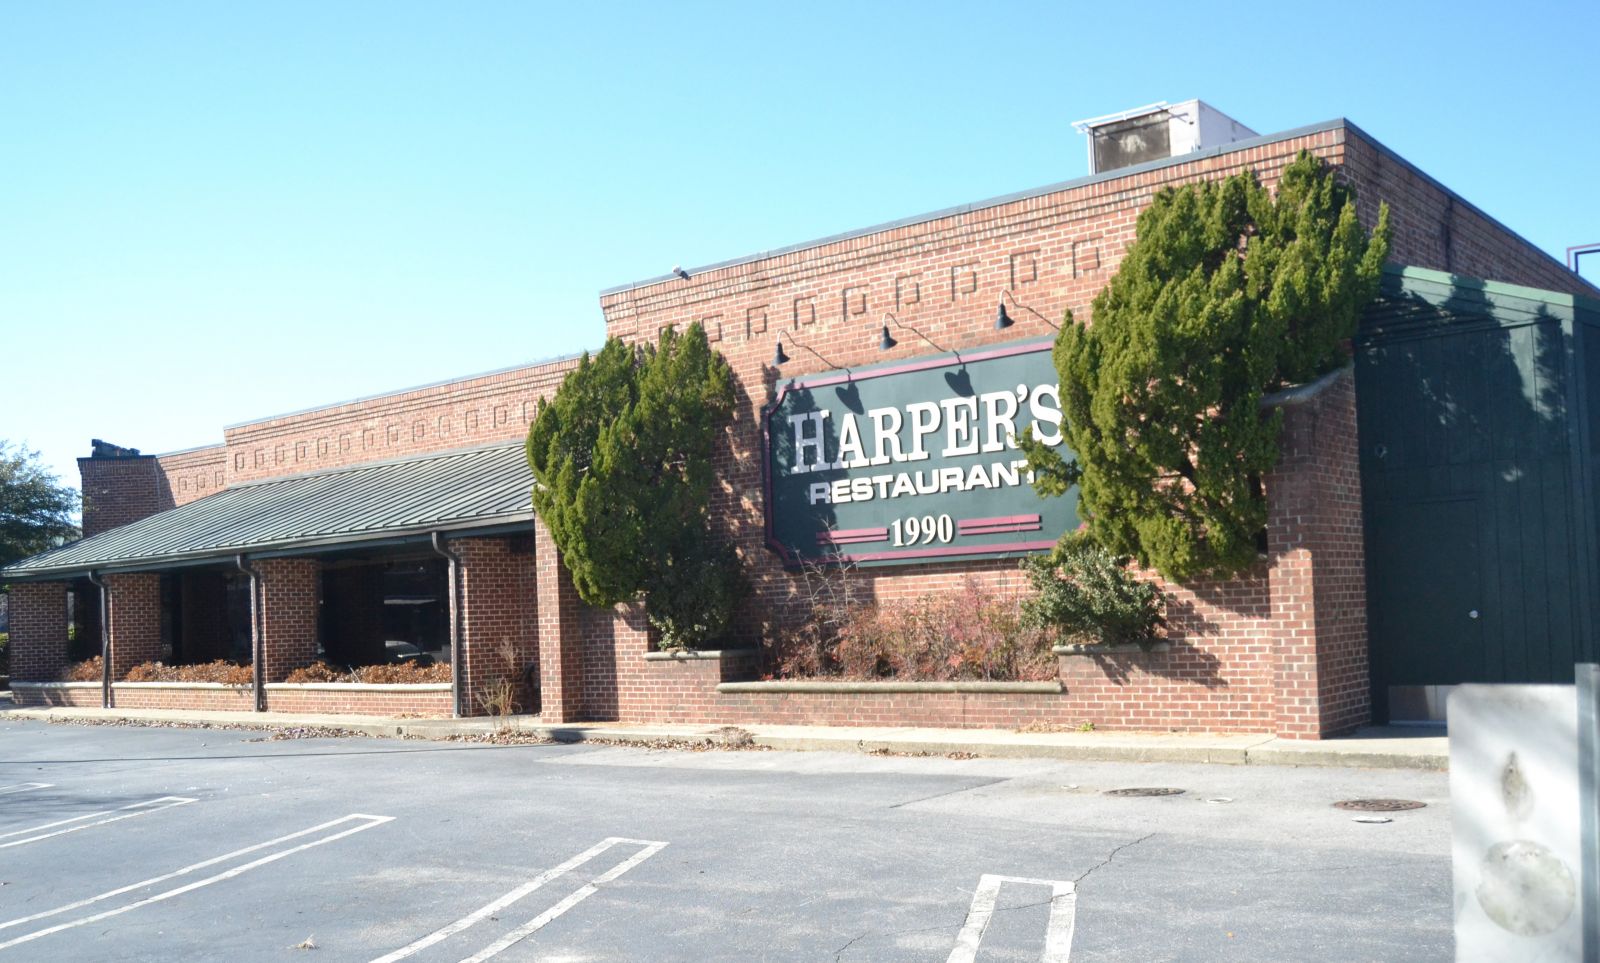 Charleston-based Home Team BBQ is moving into the former Harper's site in Five Points. (Photo/Travis Boland)